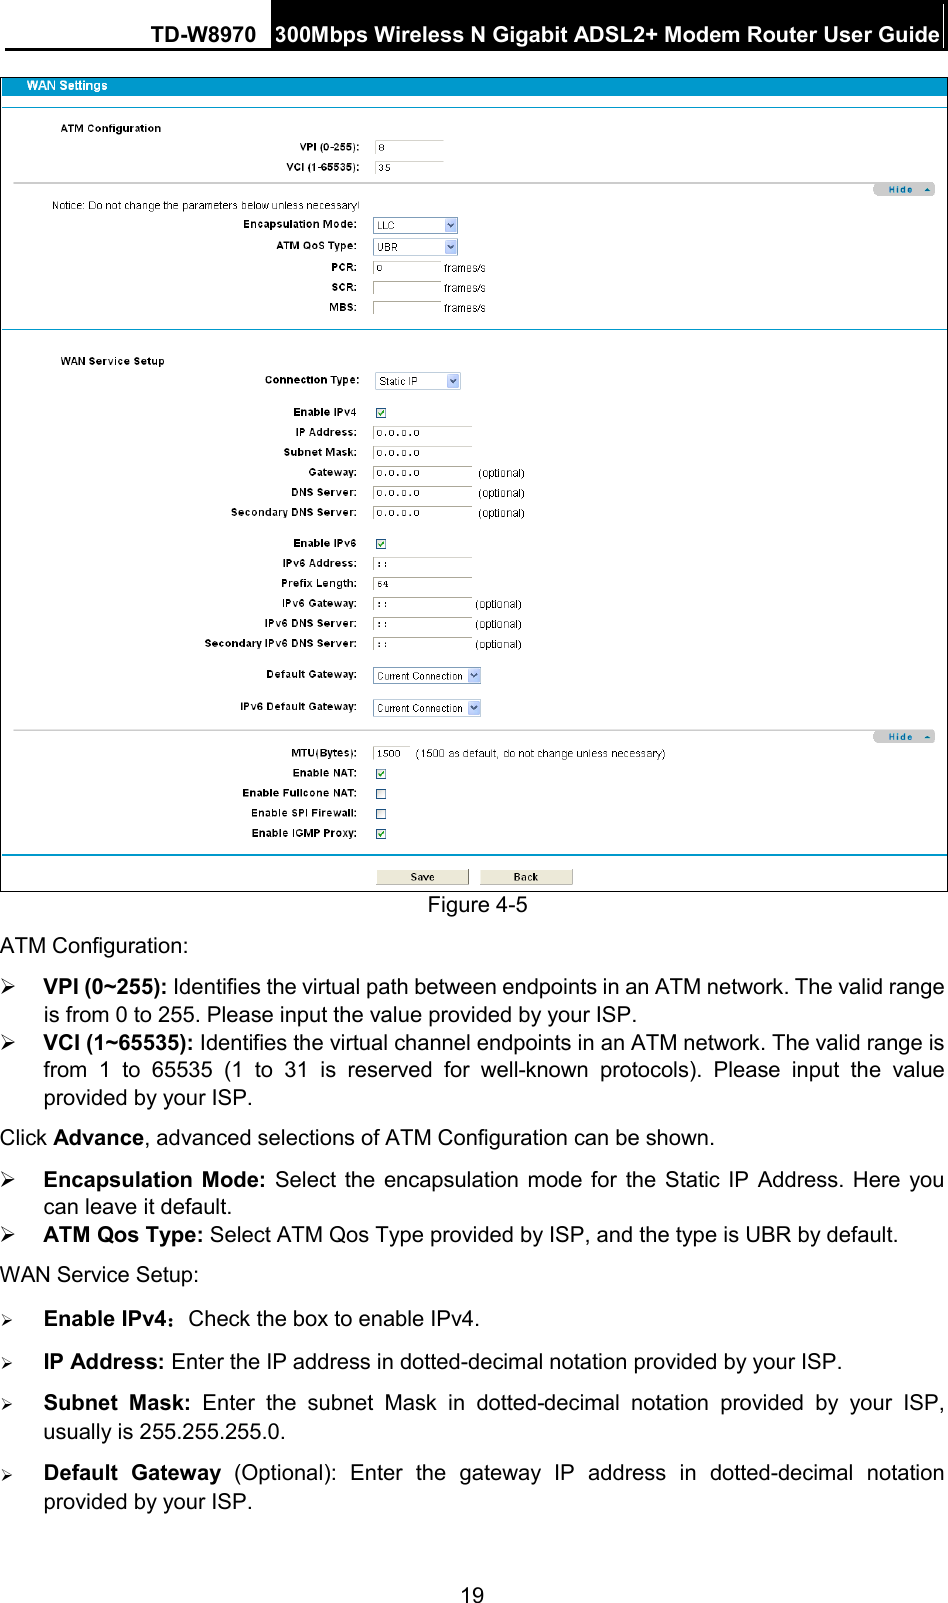 TD-W8970 300Mbps Wireless N Gigabit ADSL2+ Modem Router User Guide   Figure 4-5 ATM Configuration:  VPI (0~255): Identifies the virtual path between endpoints in an ATM network. The valid range is from 0 to 255. Please input the value provided by your ISP.  VCI (1~65535): Identifies the virtual channel endpoints in an ATM network. The valid range is from  1  to 65535 (1 to 31 is reserved for well-known protocols). Please input the value provided by your ISP. Click Advance, advanced selections of ATM Configuration can be shown.  Encapsulation Mode:  Select the encapsulation mode for the Static IP Address. Here you can leave it default.  ATM Qos Type: Select ATM Qos Type provided by ISP, and the type is UBR by default. WAN Service Setup:  Enable IPv4：Check the box to enable IPv4.  IP Address: Enter the IP address in dotted-decimal notation provided by your ISP.  Subnet Mask: Enter the subnet Mask in dotted-decimal notation provided by your ISP, usually is 255.255.255.0.  Default Gateway (Optional):  Enter the gateway IP address in dotted-decimal notation provided by your ISP. 19 